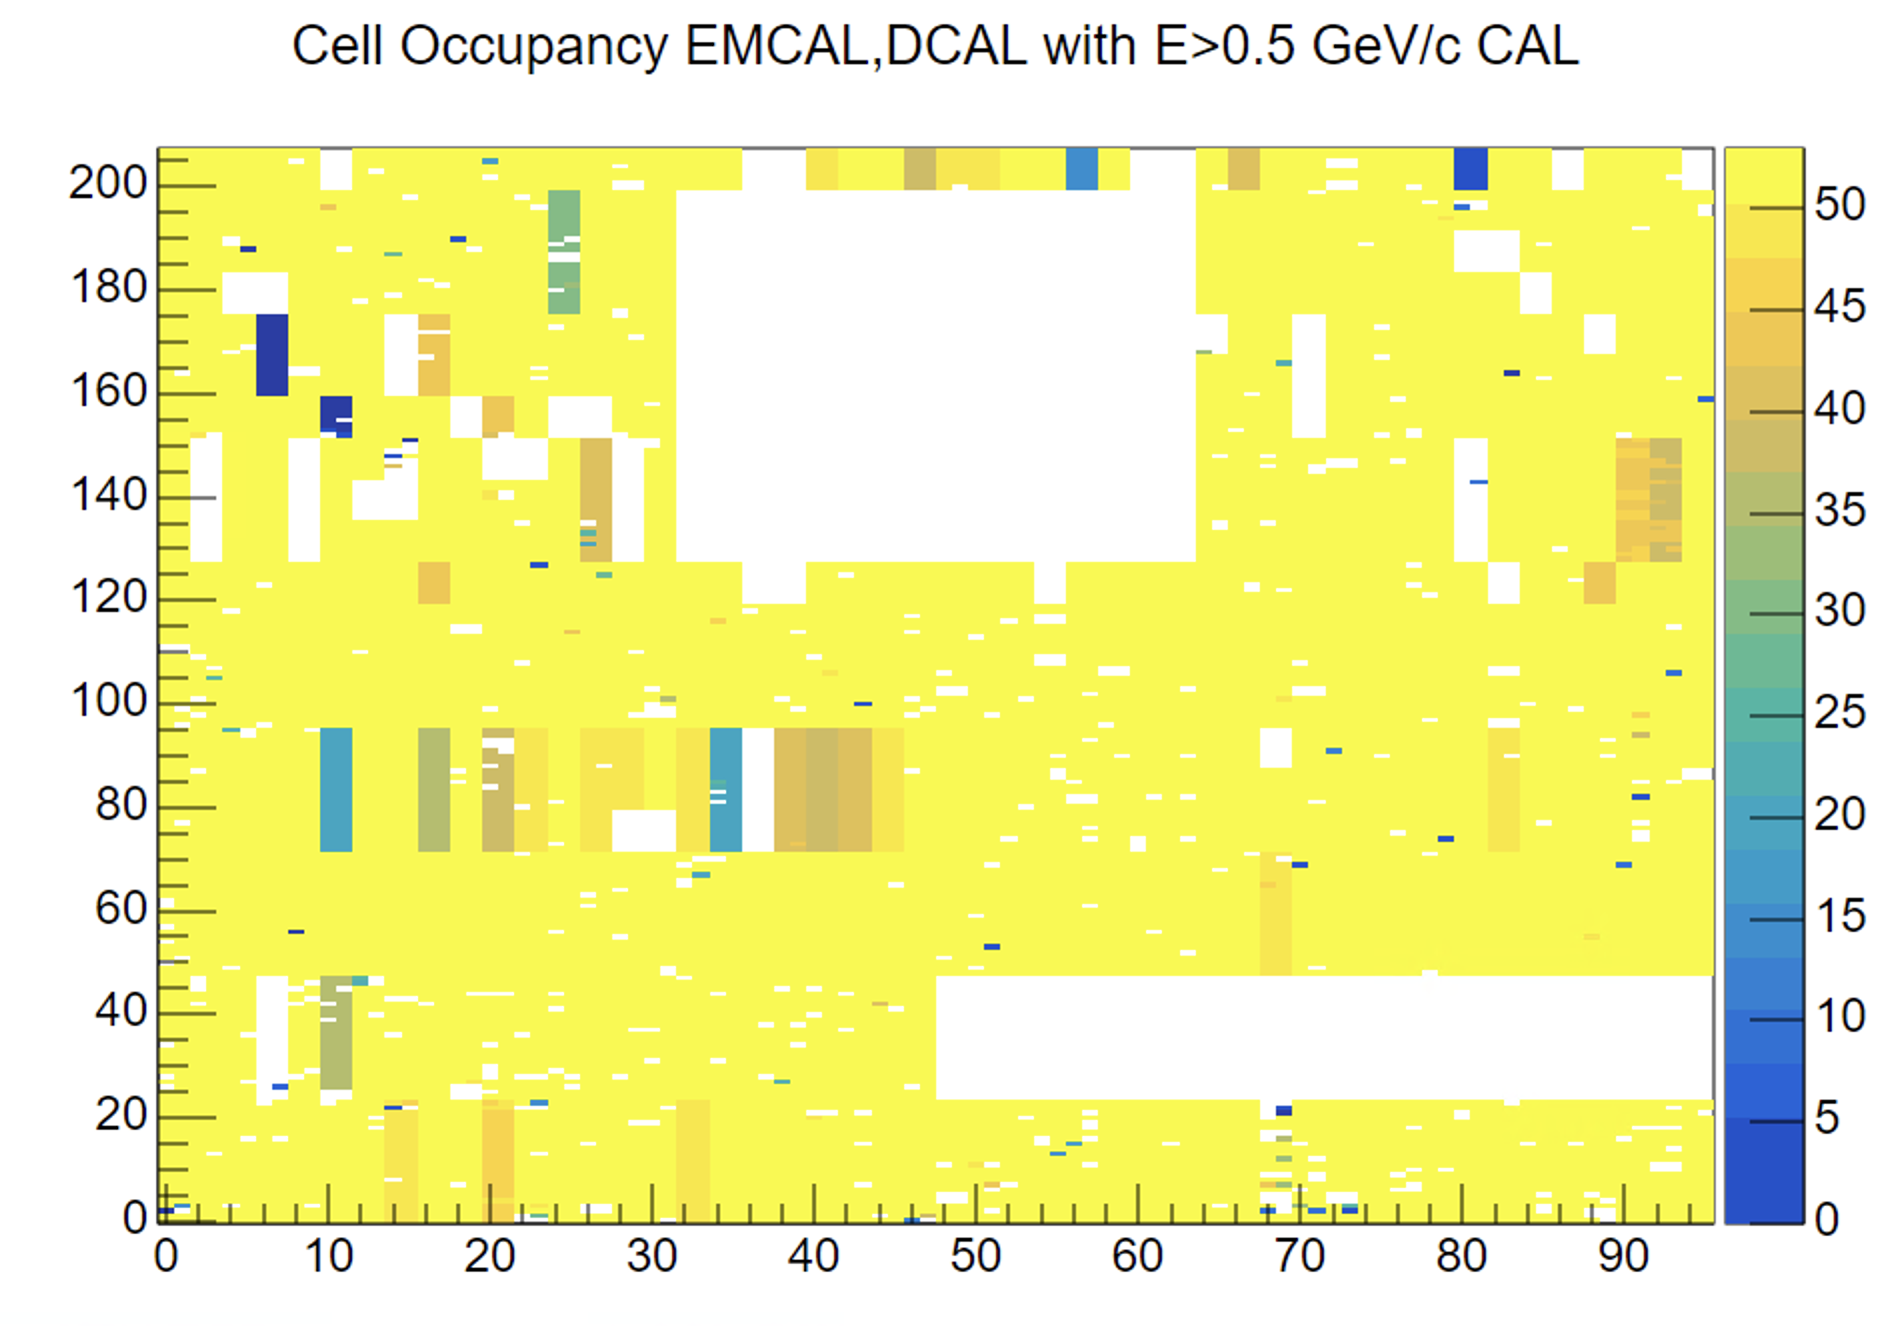 Cell Occupancy EMCAL,DCAL with E>0.5 GeV/c CAL